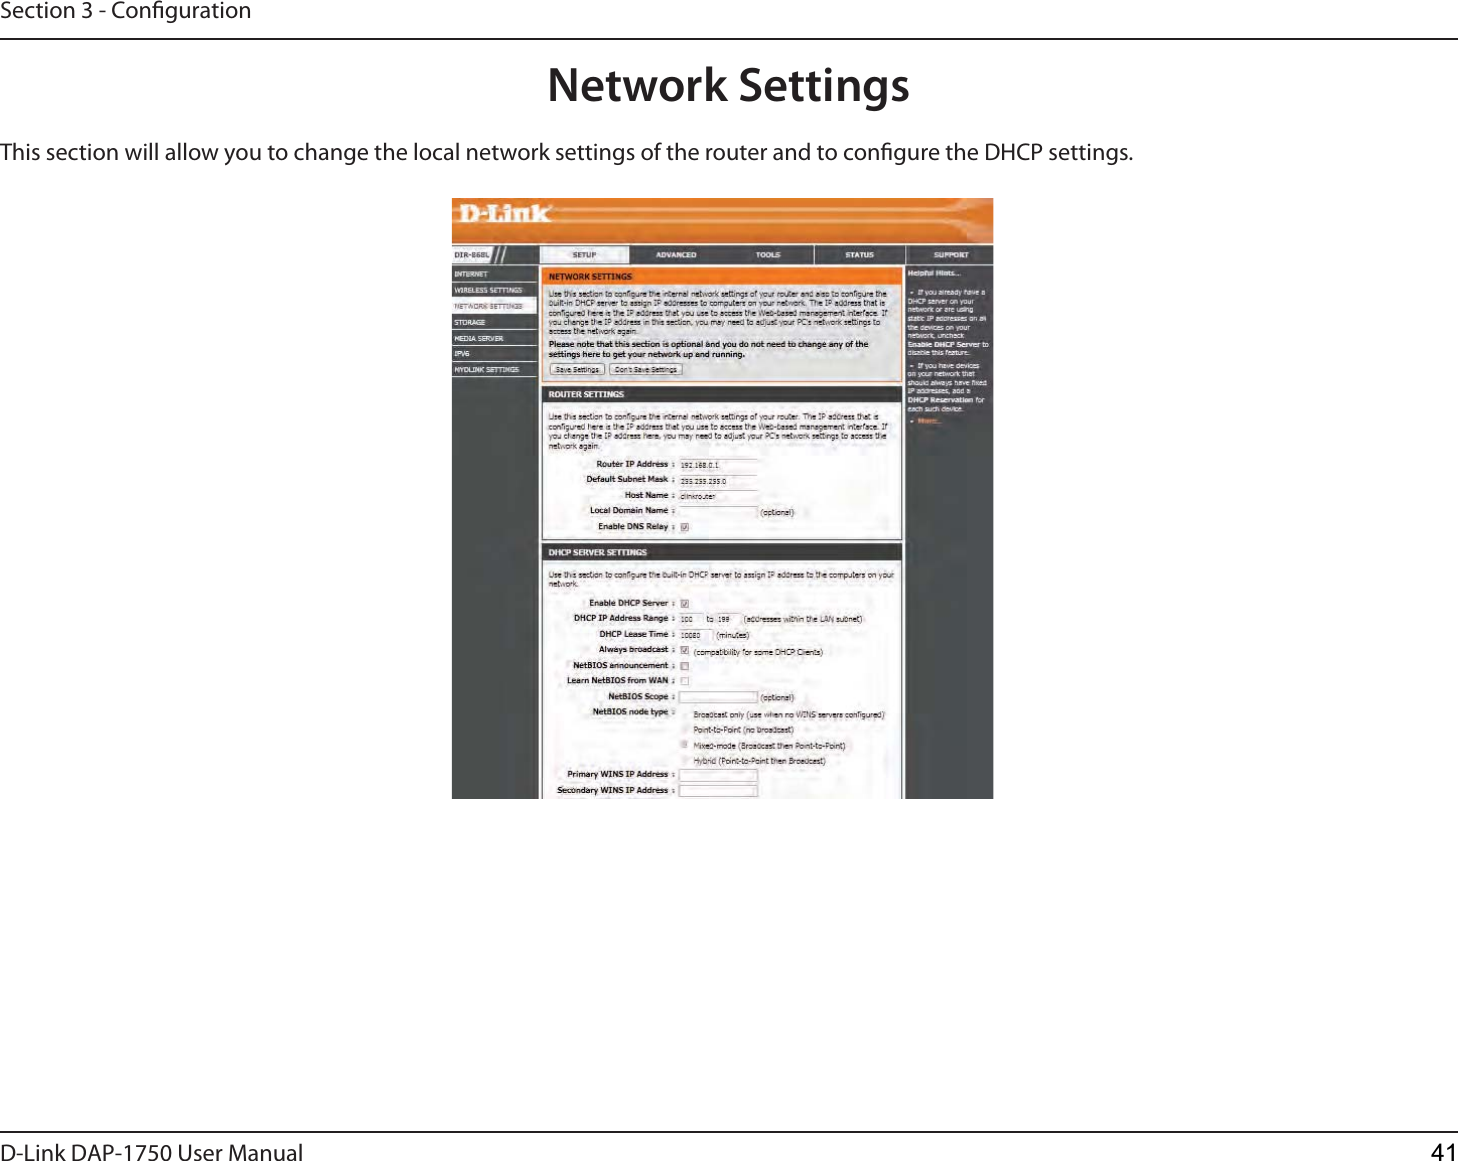 D-Link %&quot;1 User ManualSection 3 - CongurationThis section will allow you to change the local network settings of the router and to congure the DHCP settings.Network Settings41